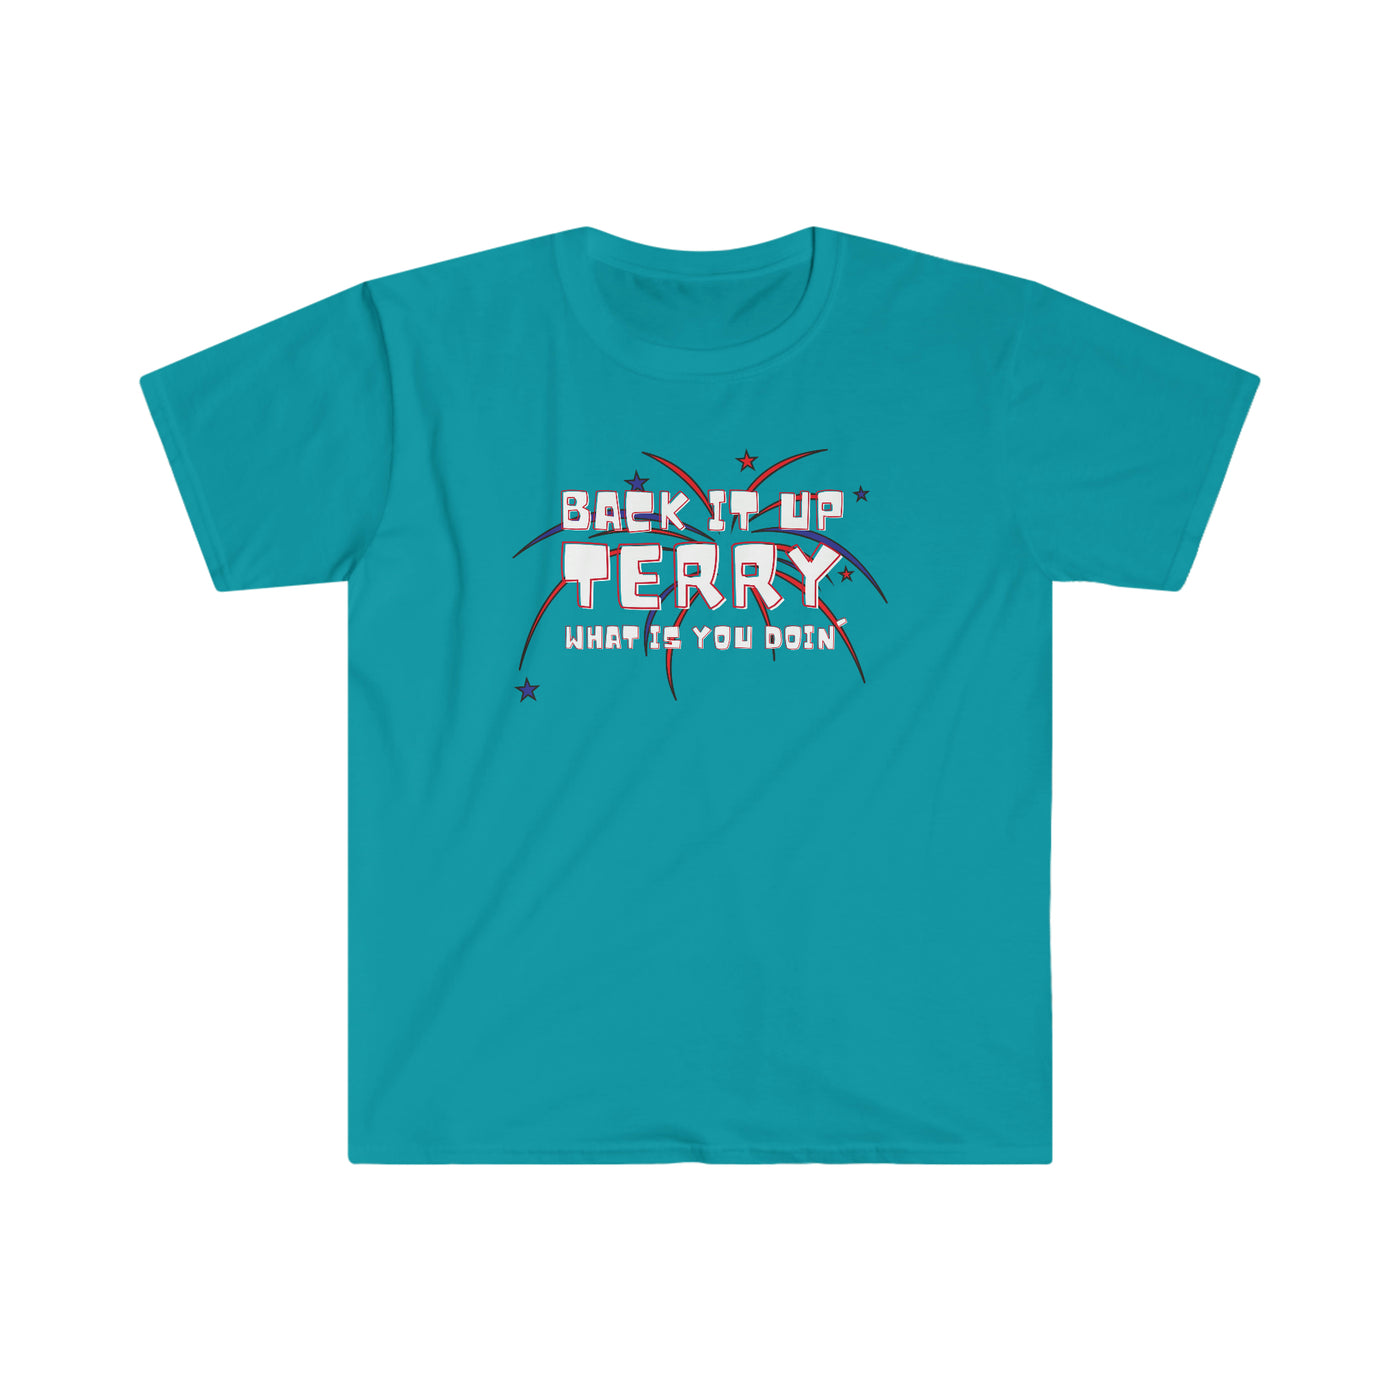 Back It Up Terry What Is You Doin' Unisex T-Shirt